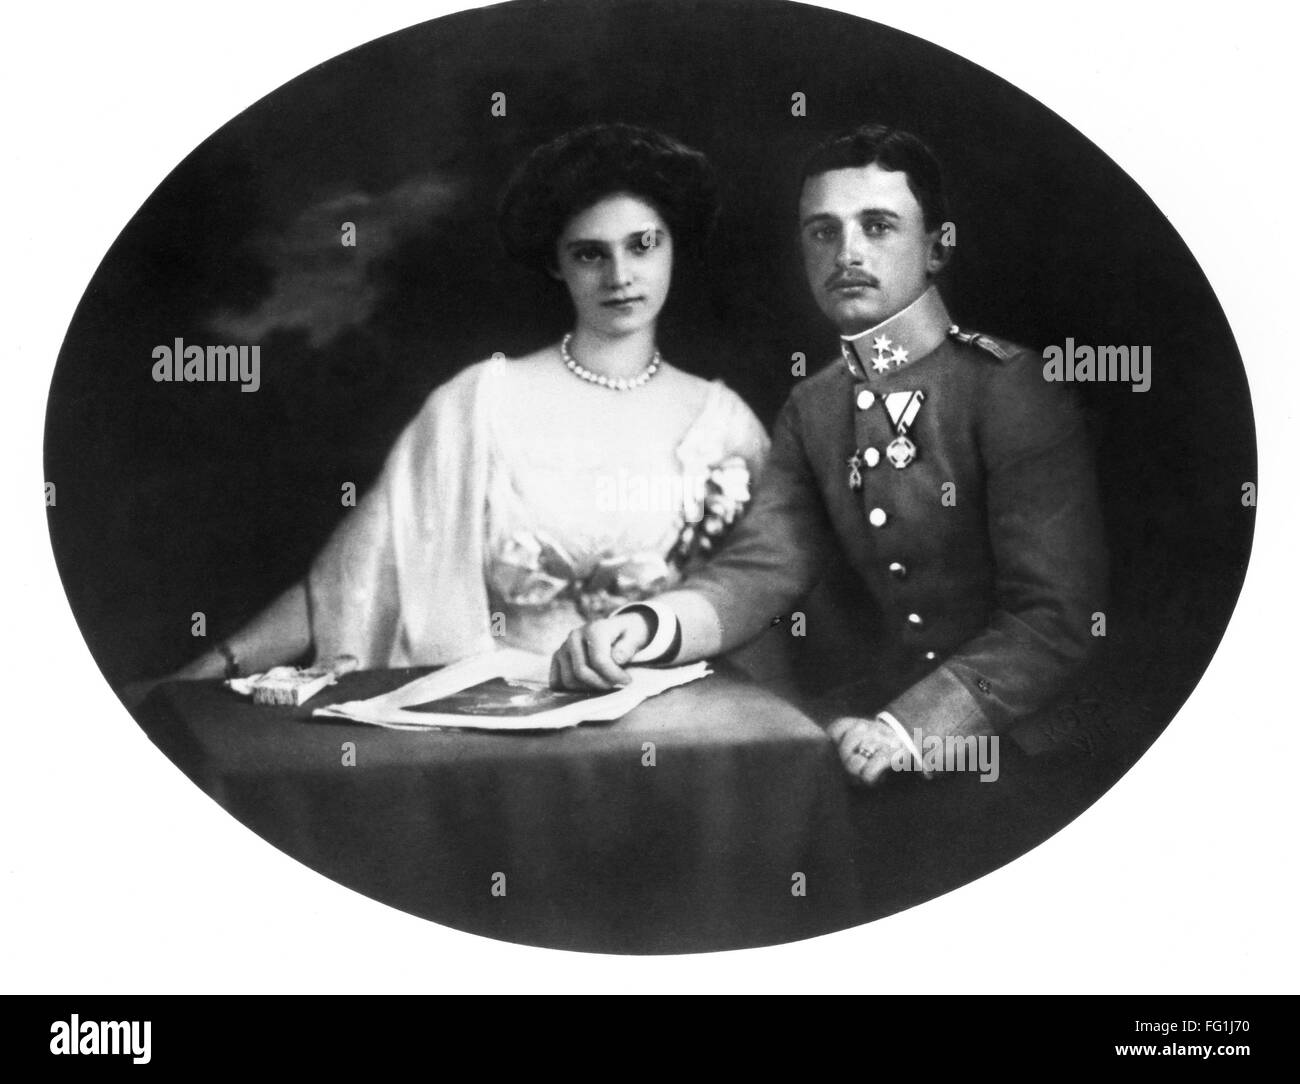 KARL I OF AUSTRIA (1887-1922). /nThe last Emperor of Austria, and the last monarch of the Habsburg Dynasty. He reigned as Emperor Karl I of Austria, King Charles III of Bohemia and King Charles IV of Hungary from 1916 until 1918. Betrothal portrait with P Stock Photo